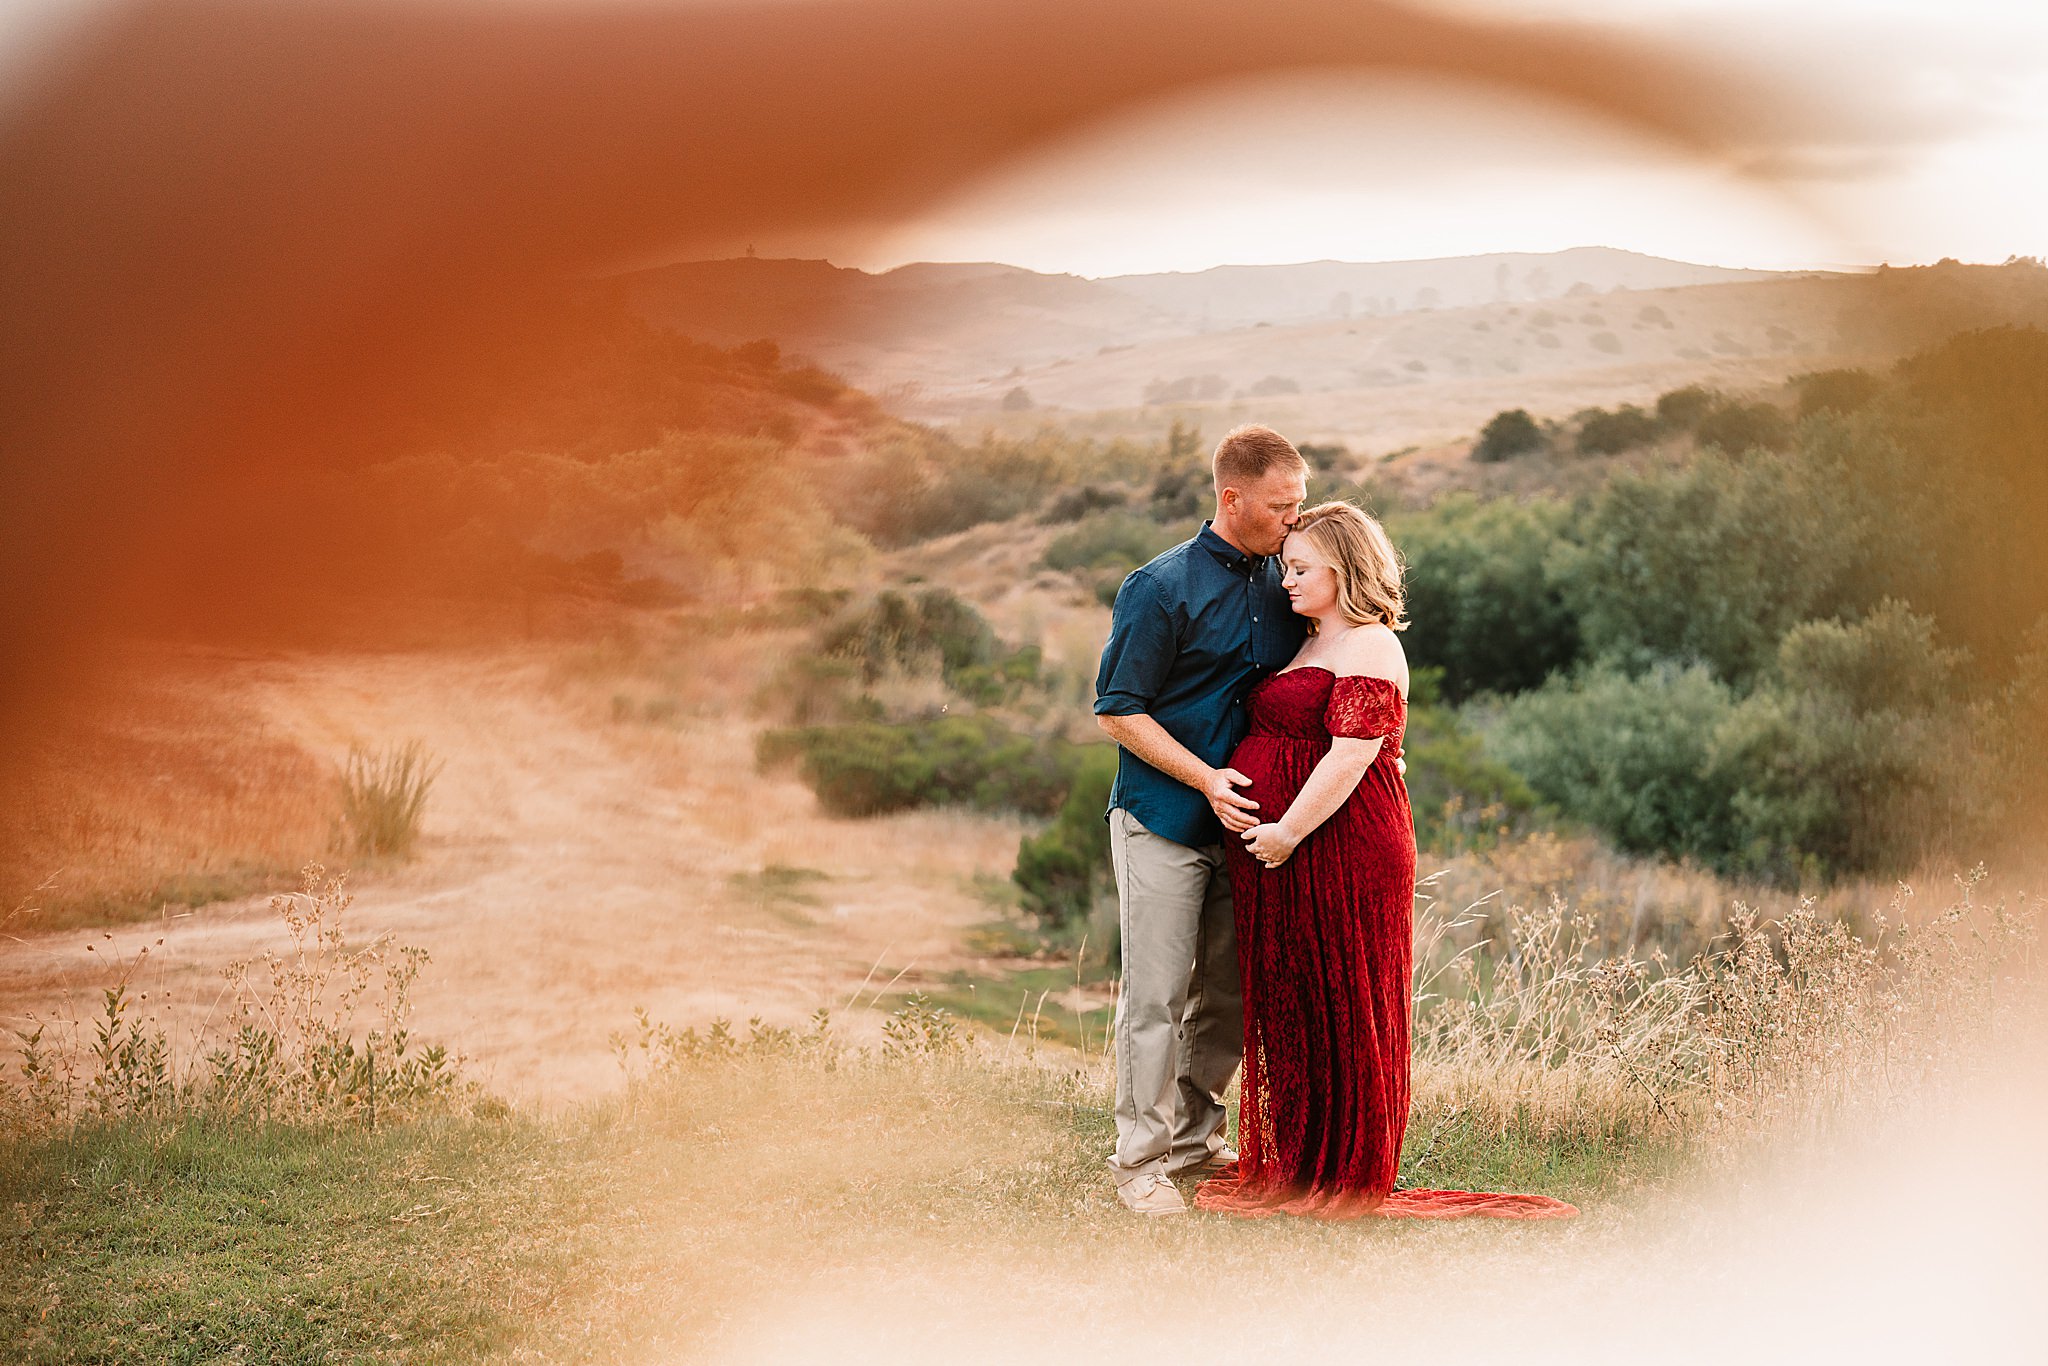 Oceanside Maternity Photography, Carlsbad Maternity Photography, North County San Diego Maternity Photography